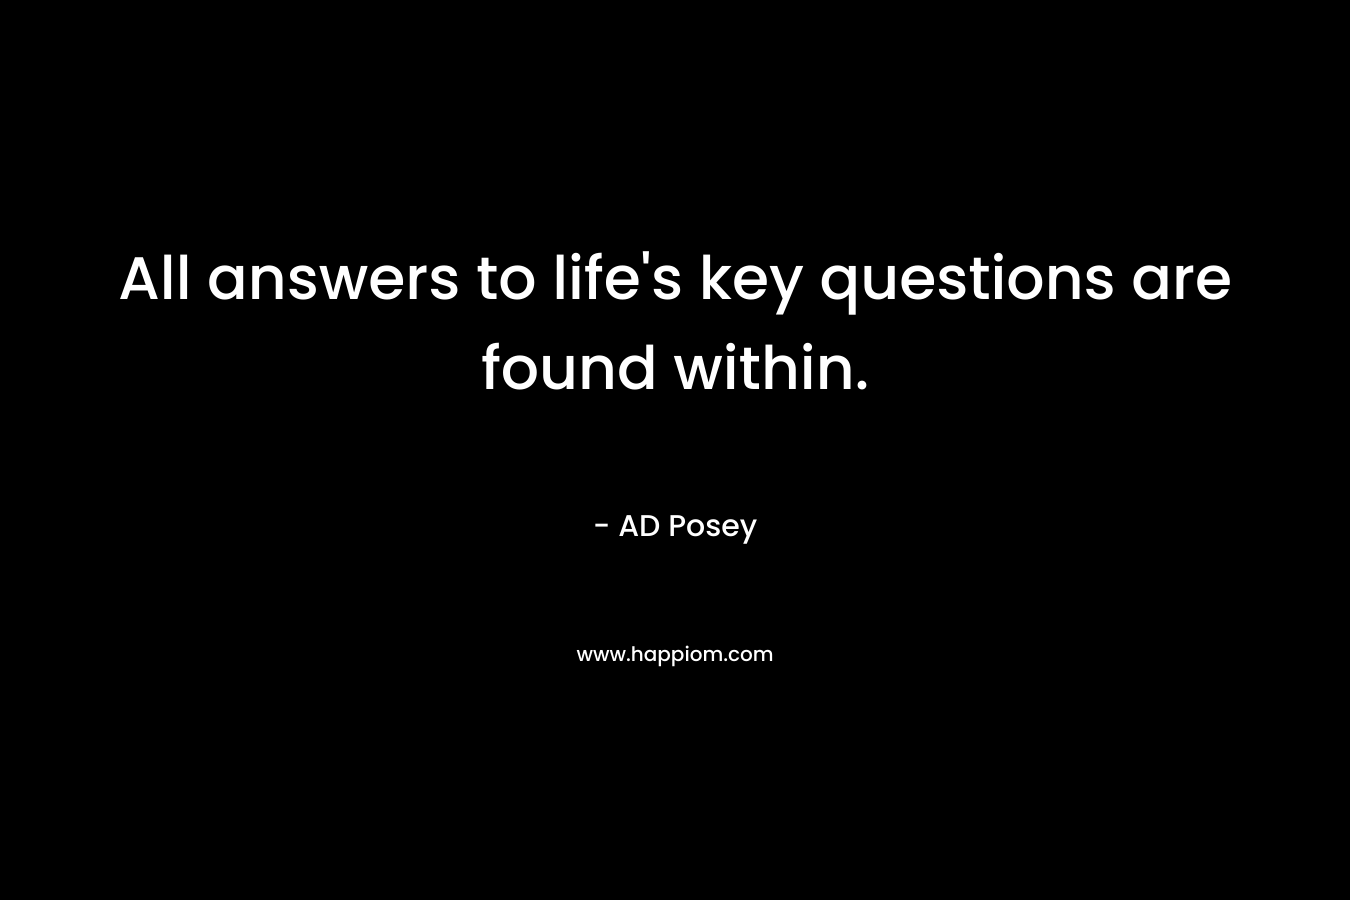 All answers to life's key questions are found within.